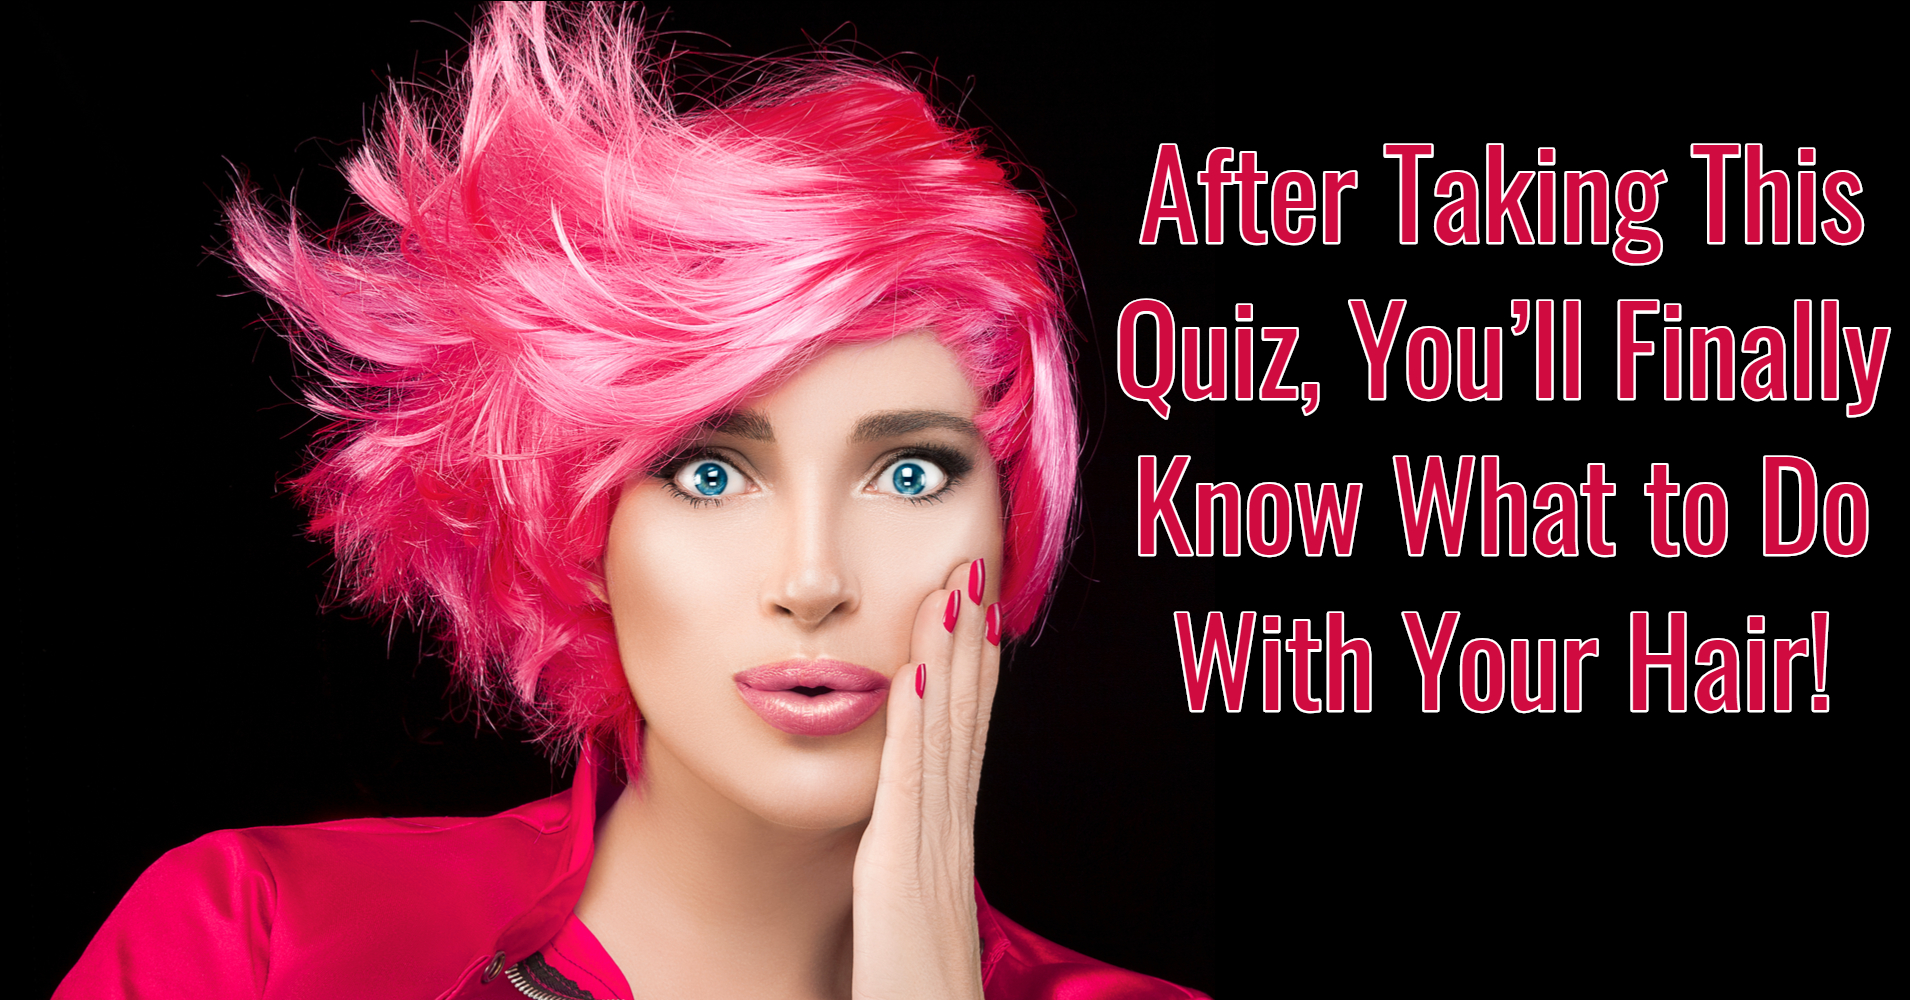 What Should I Do With My Hair? - Quiz 